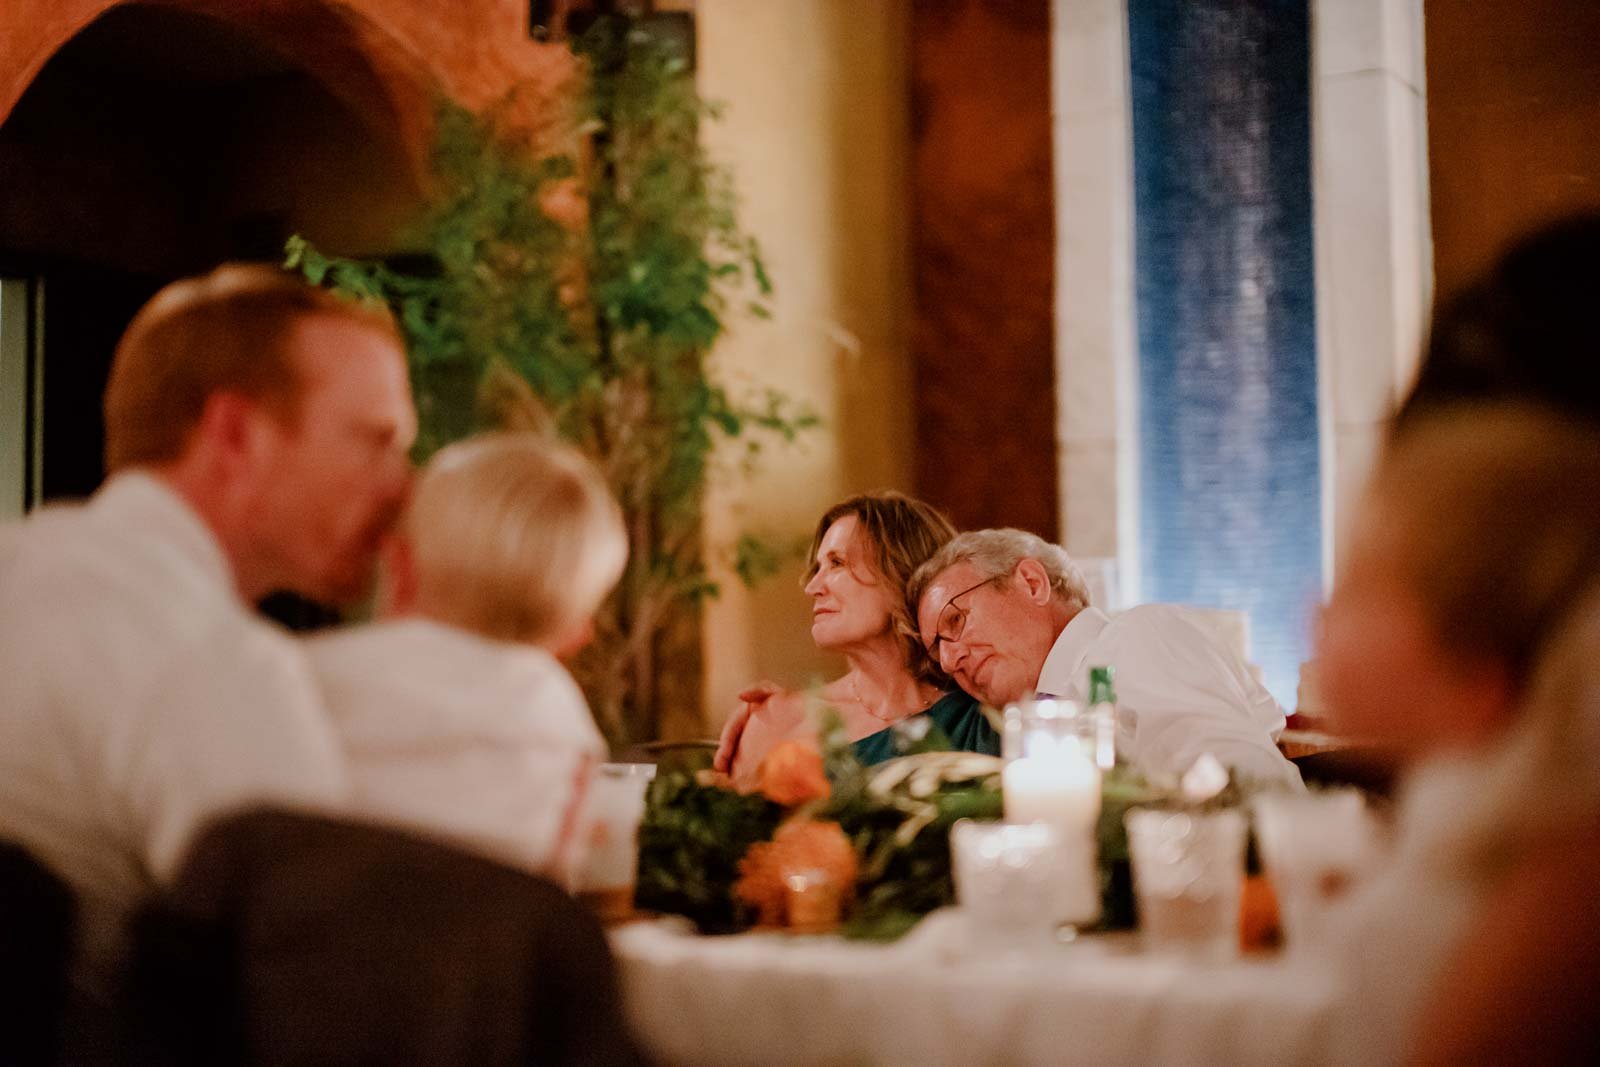 Parents of the bride get emotional during speeches at Hotel Valencia, Texas